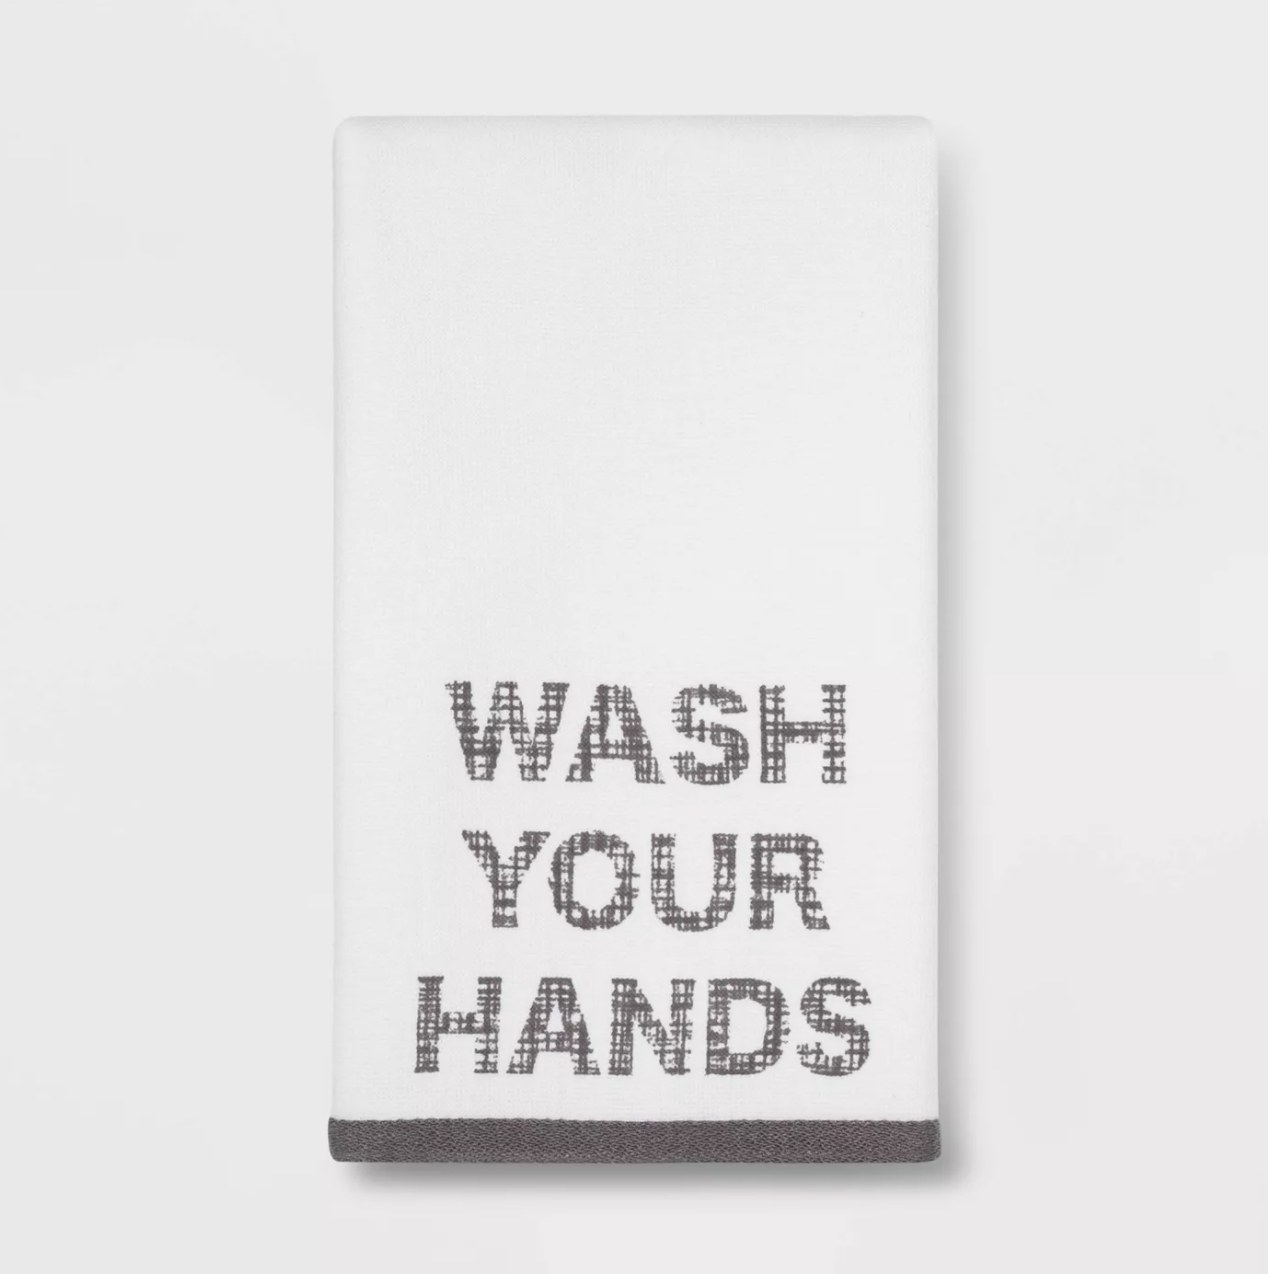 The white hand towel says &quot;WASH YOUR HANDS&quot; in a fabric patterns large block font in a charcoal gray with a matching solid trim at the bottom